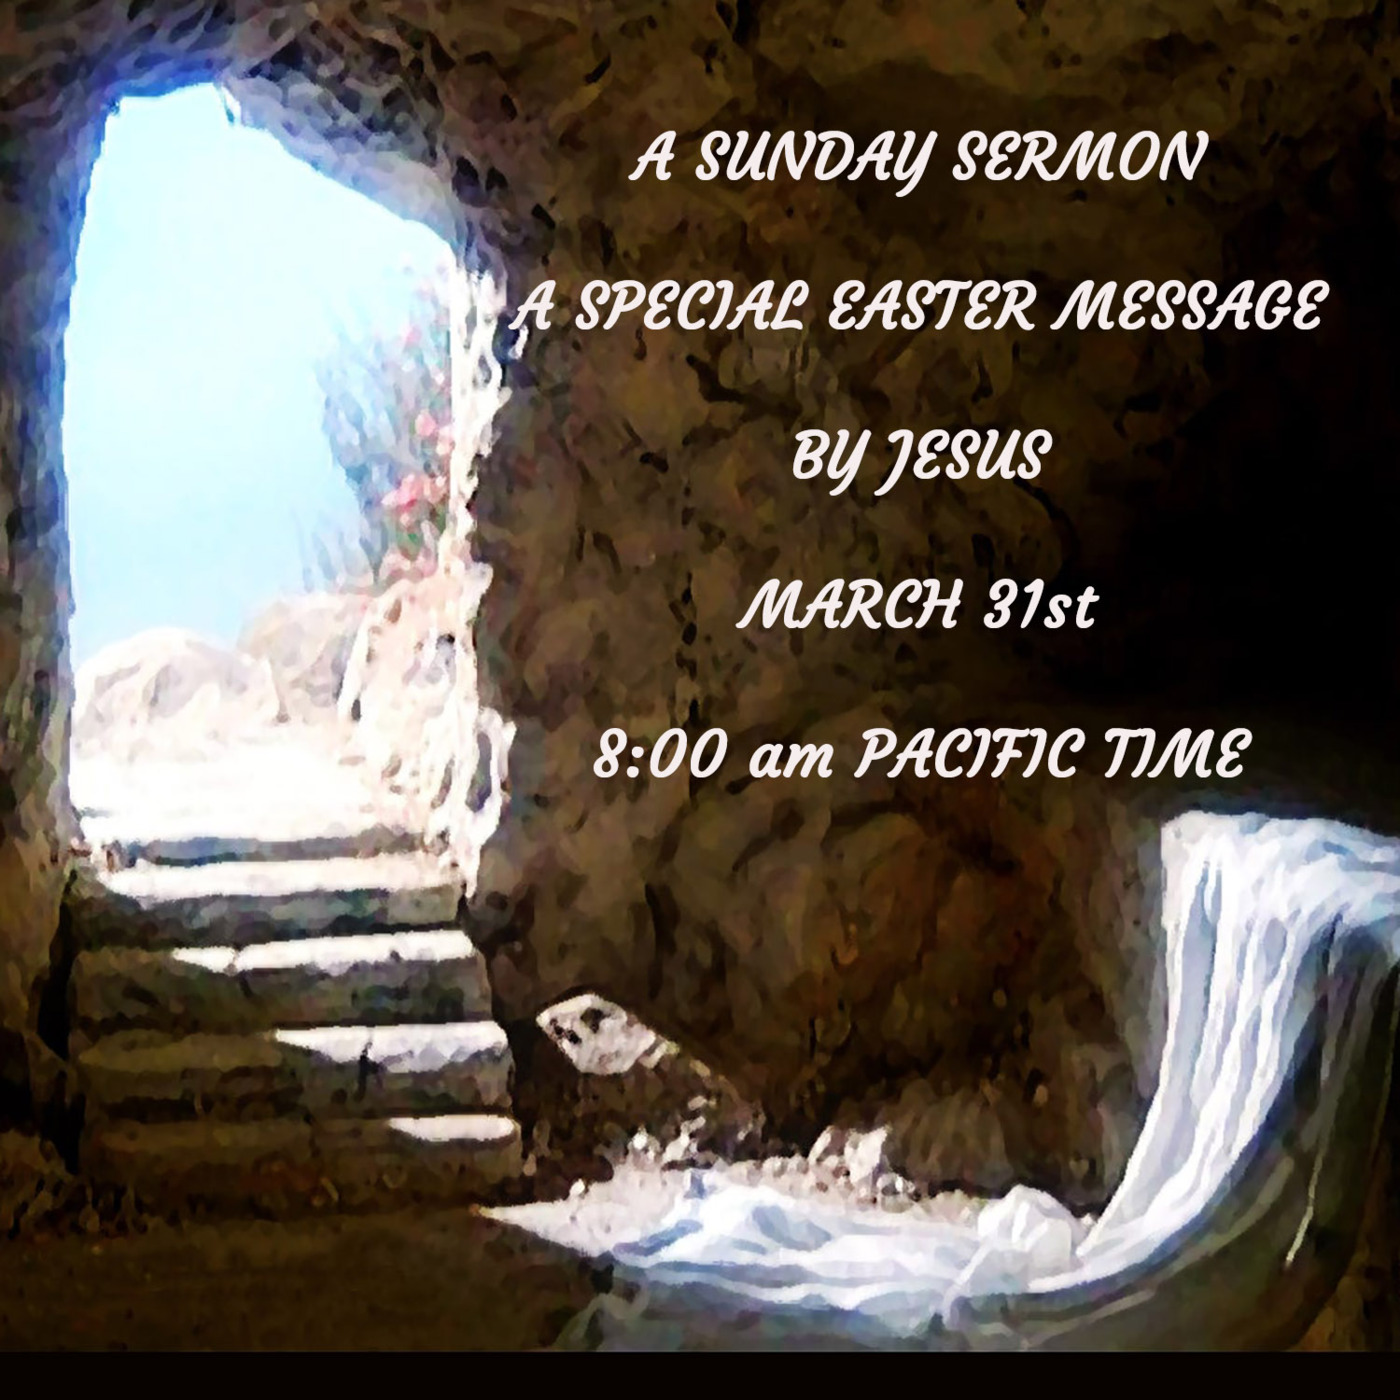 Episode 214: A Special Easter Message by Jesus - A Sunday Sermon